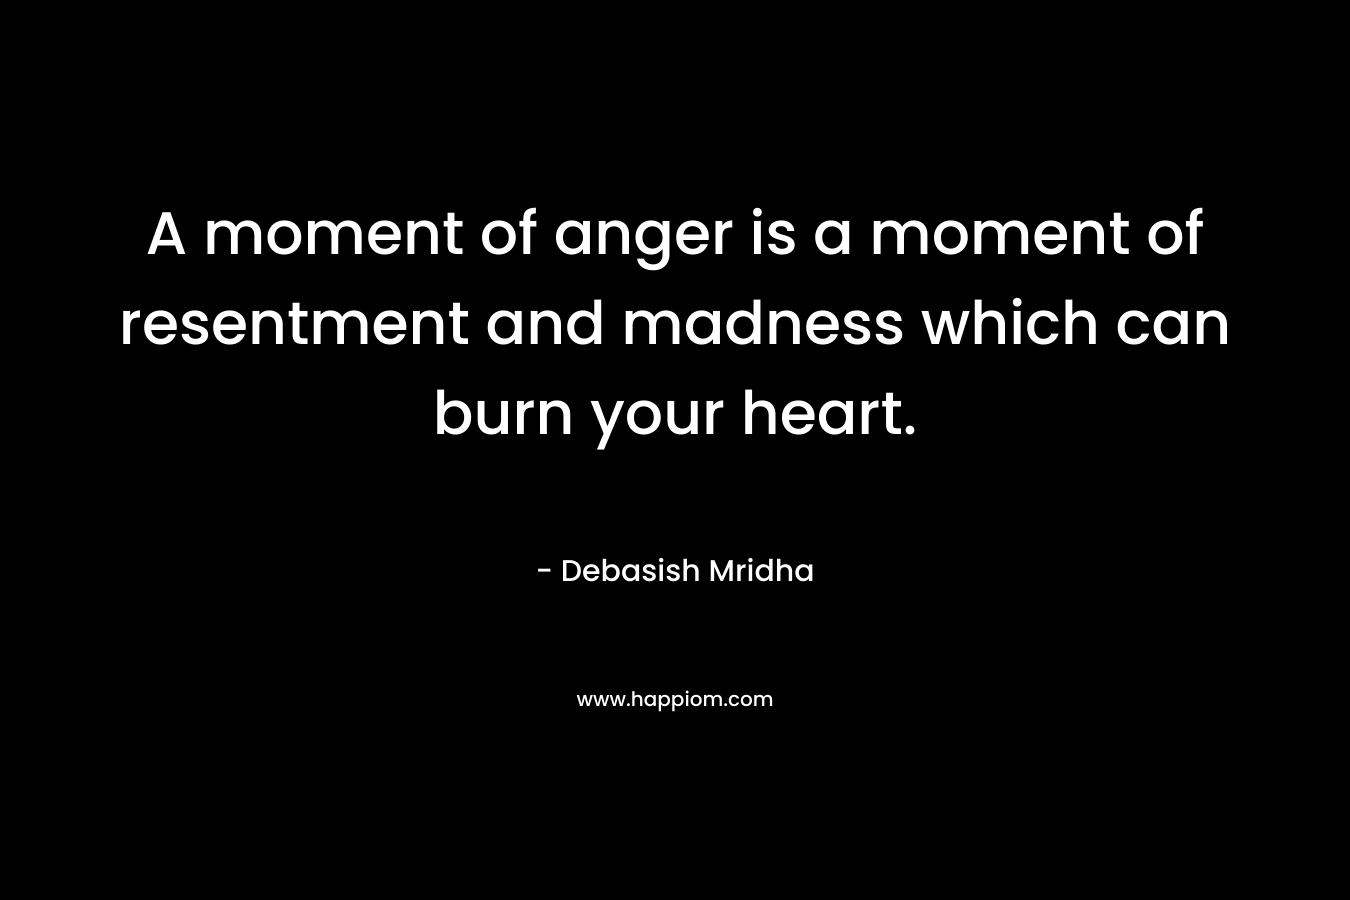 A moment of anger is a moment of resentment and madness which can burn your heart.